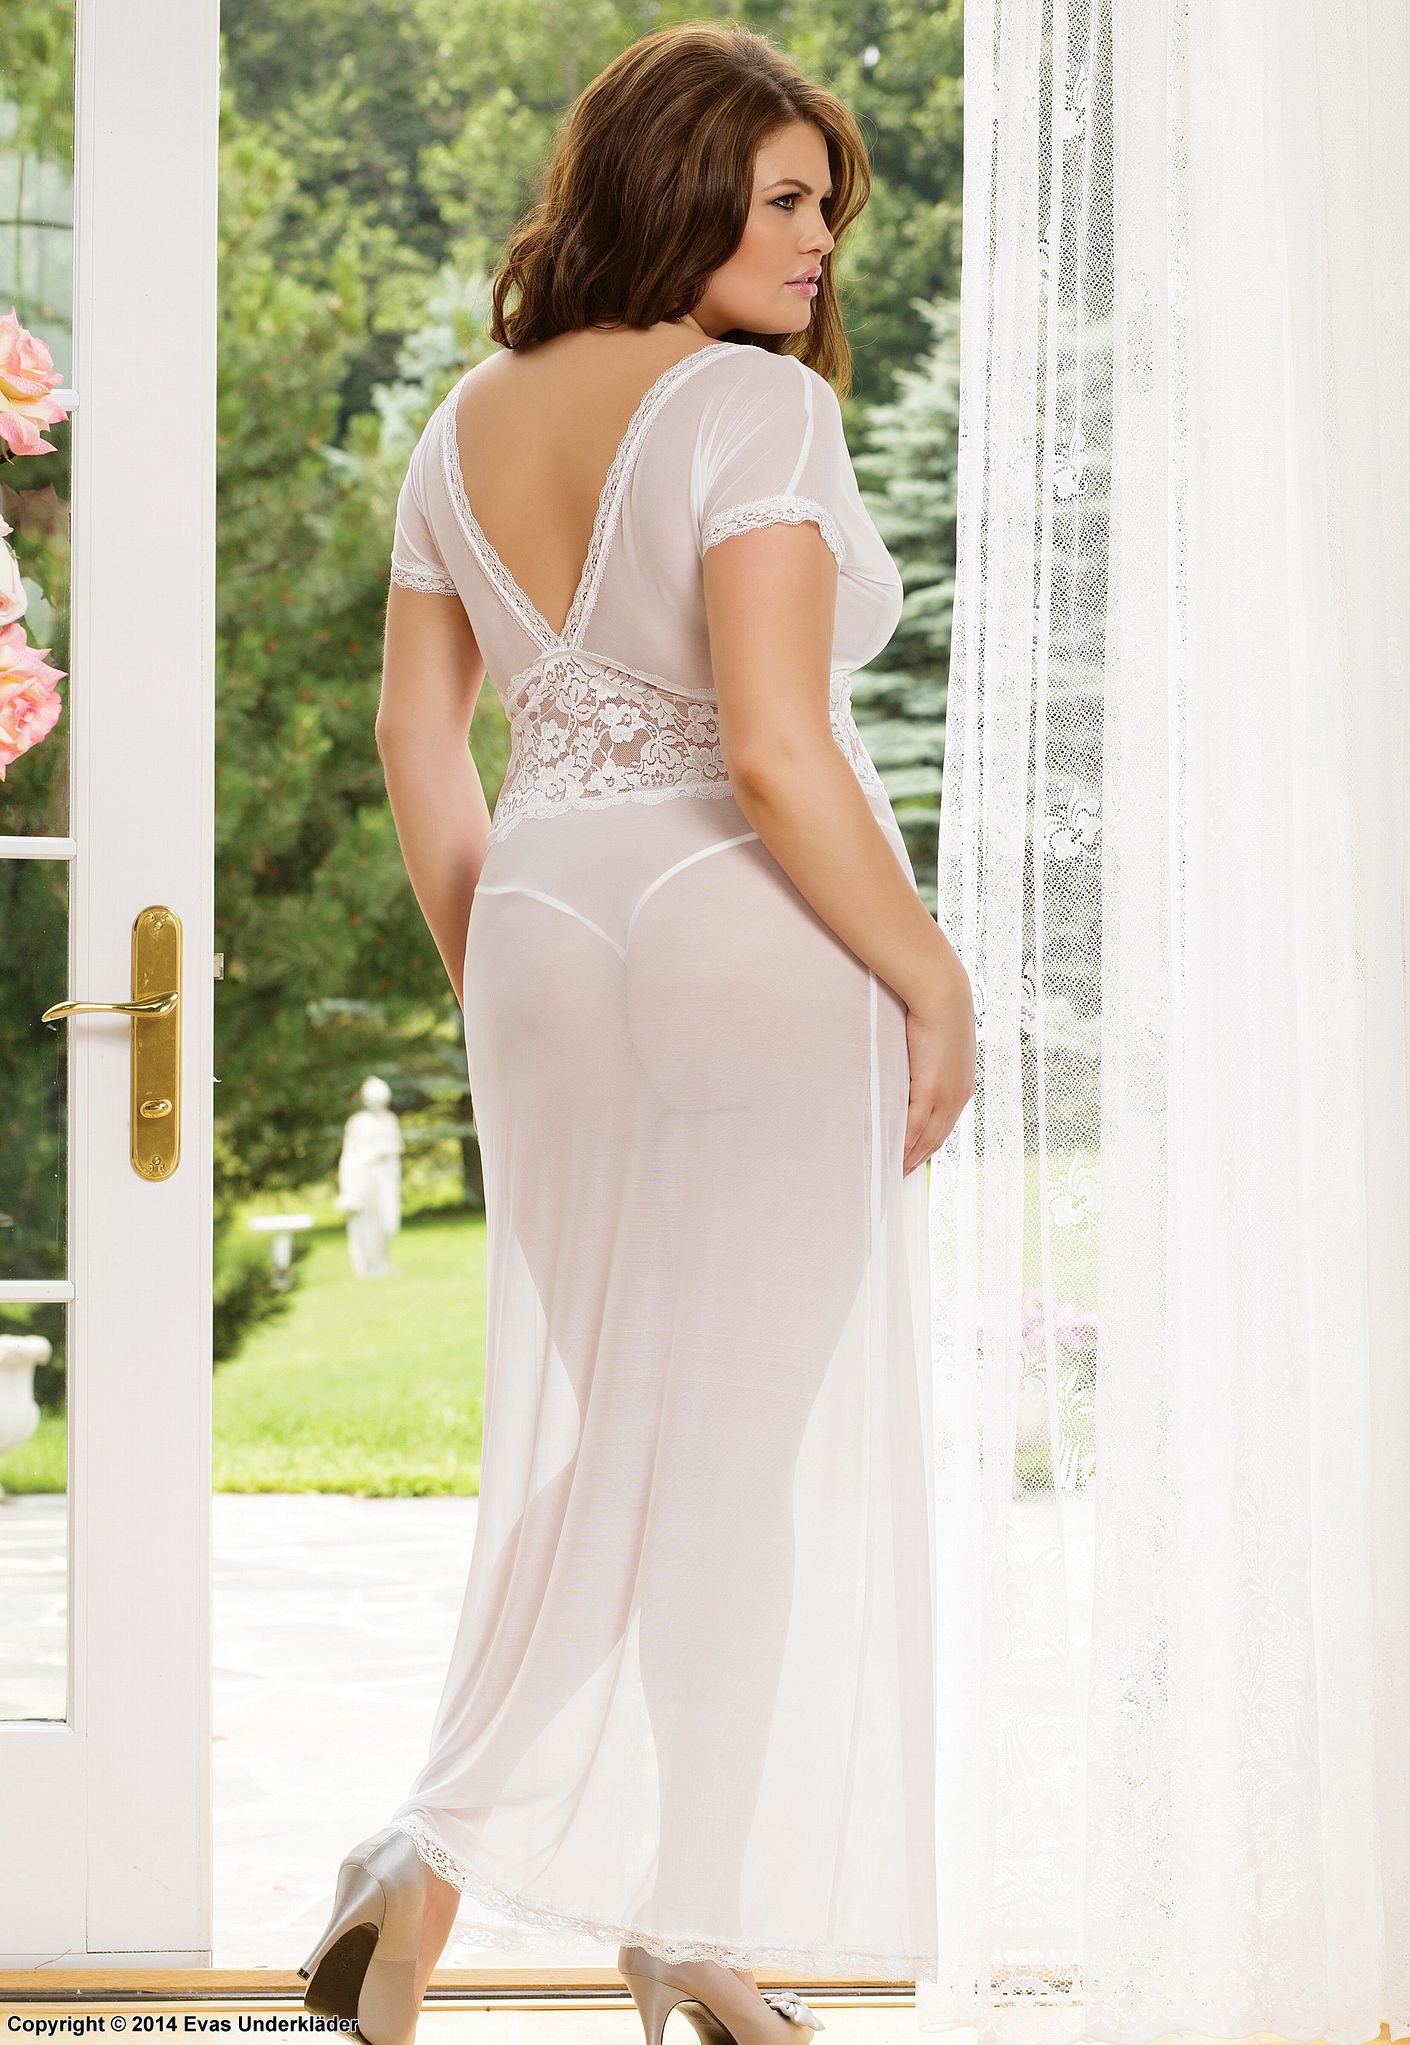 Long lace V-neck gown with high slit, plus size